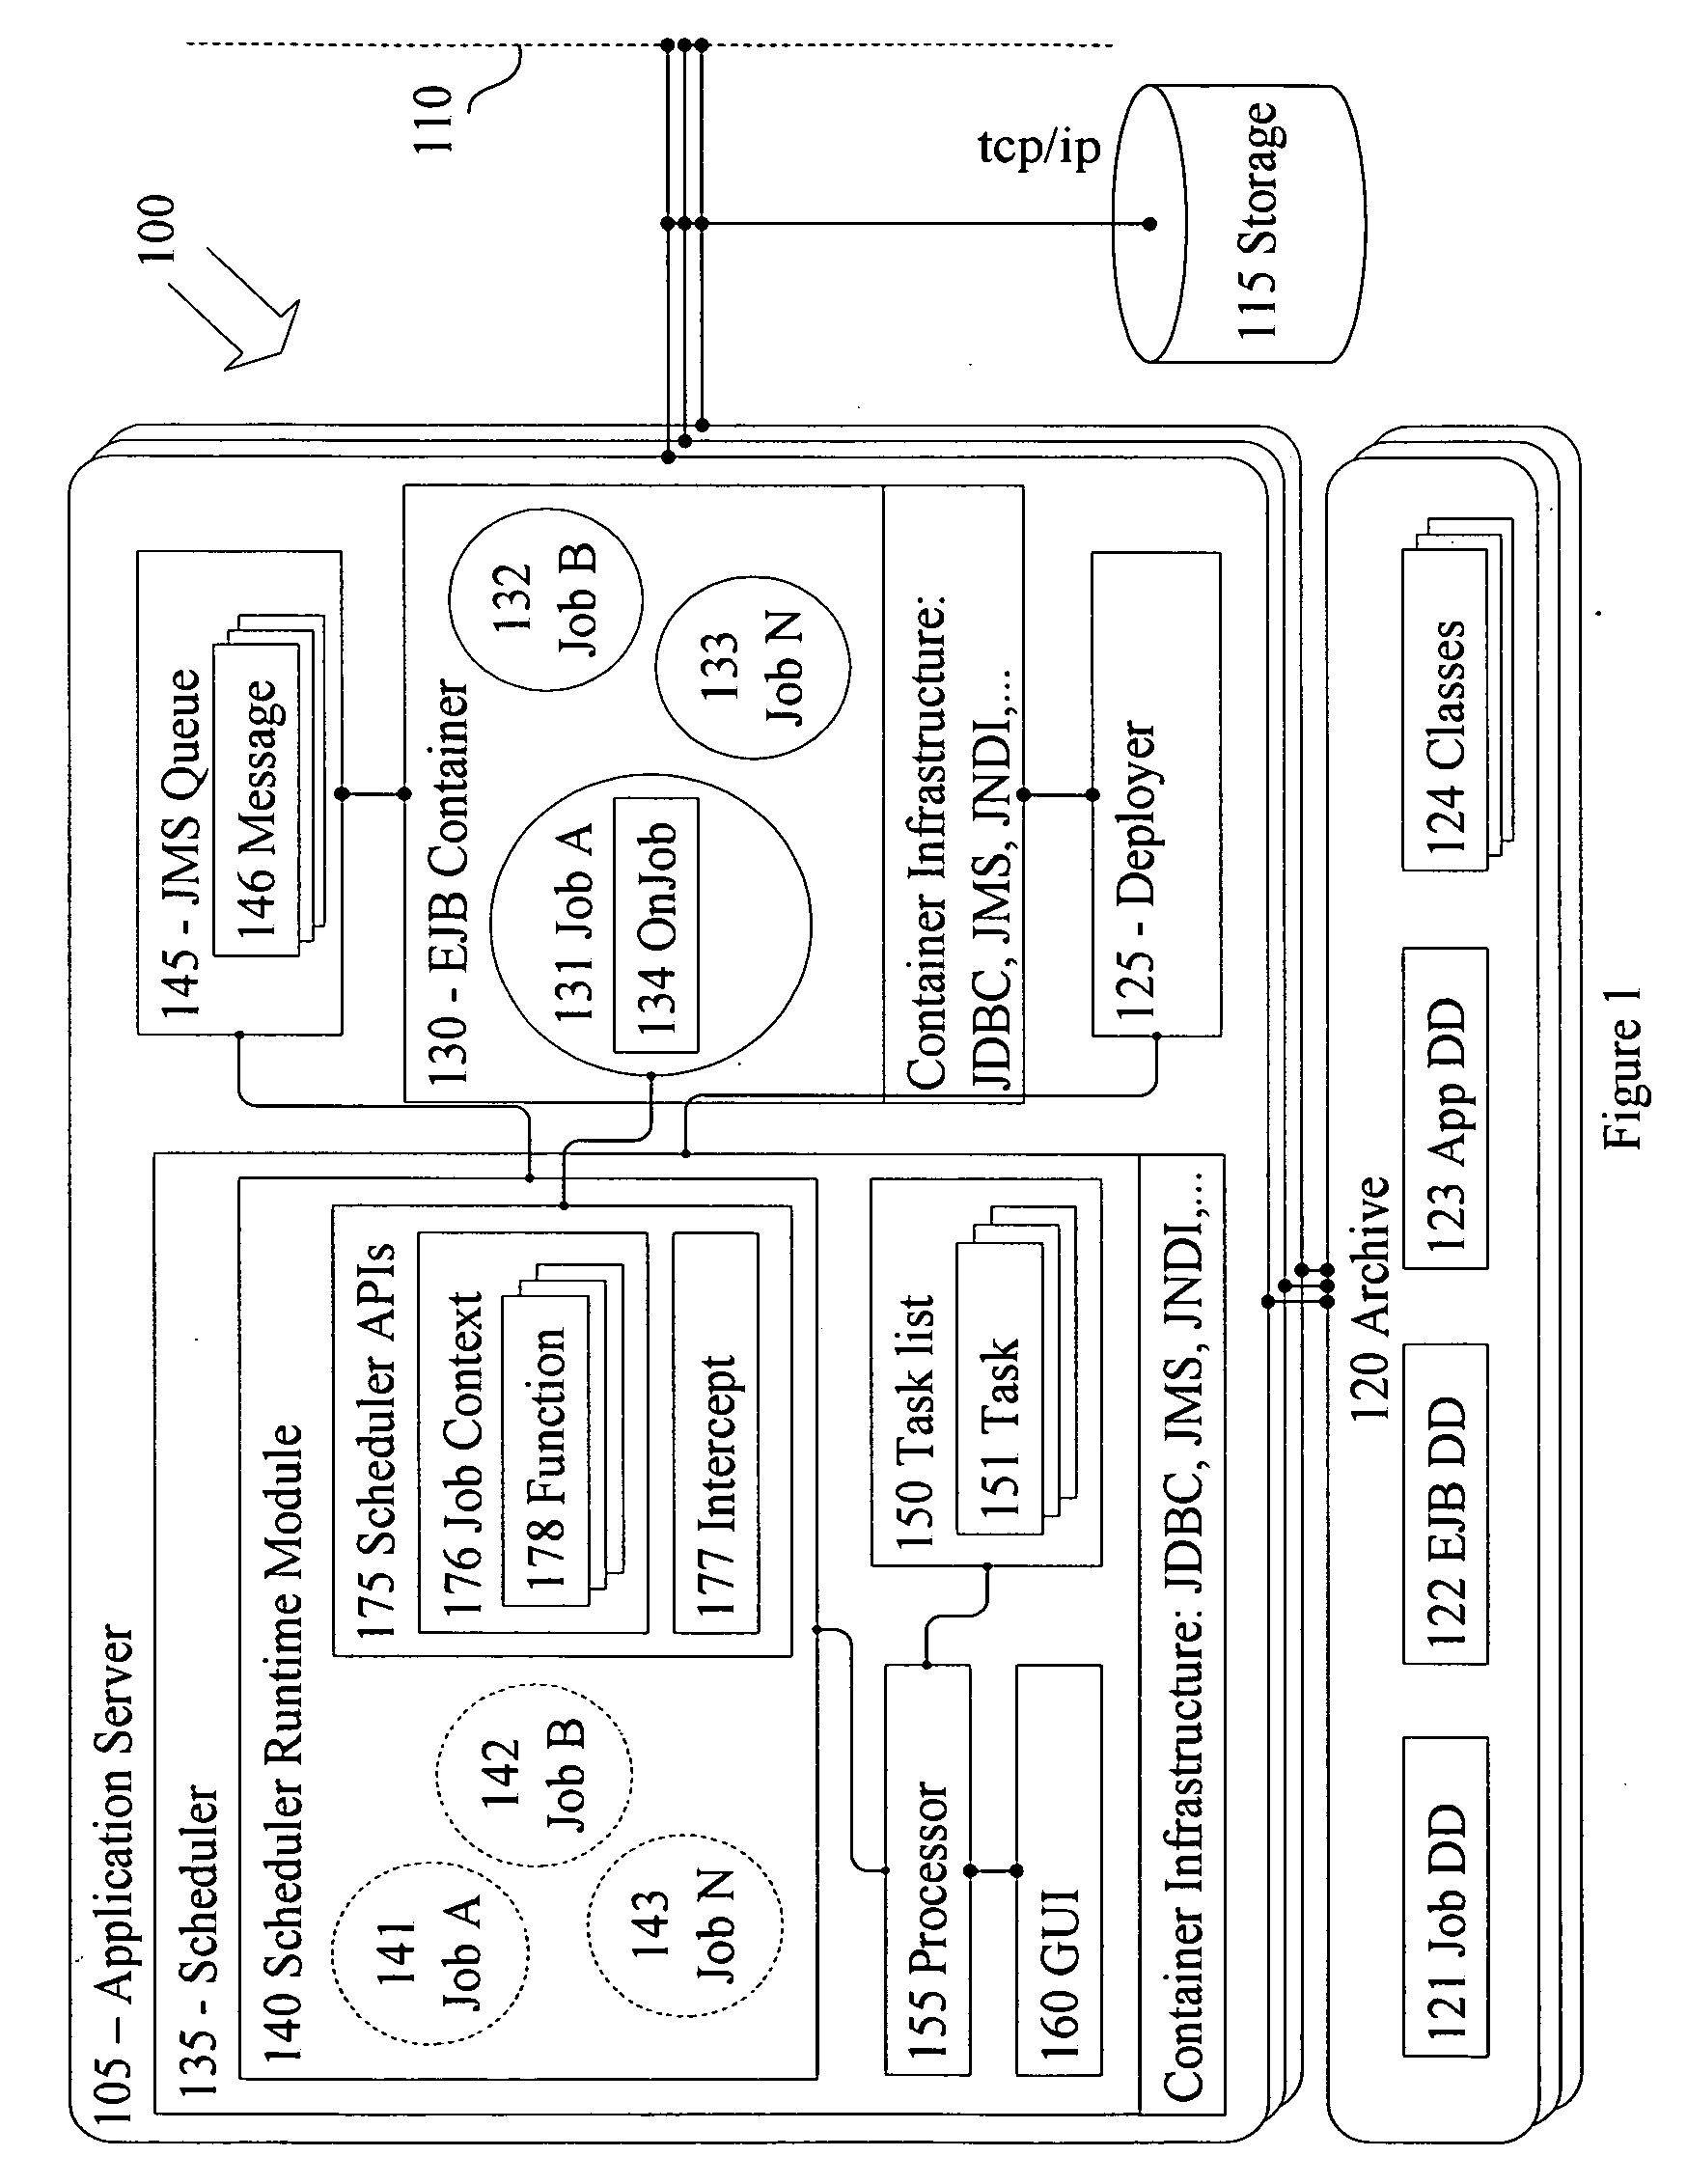 System and method for job scheduling in application servers